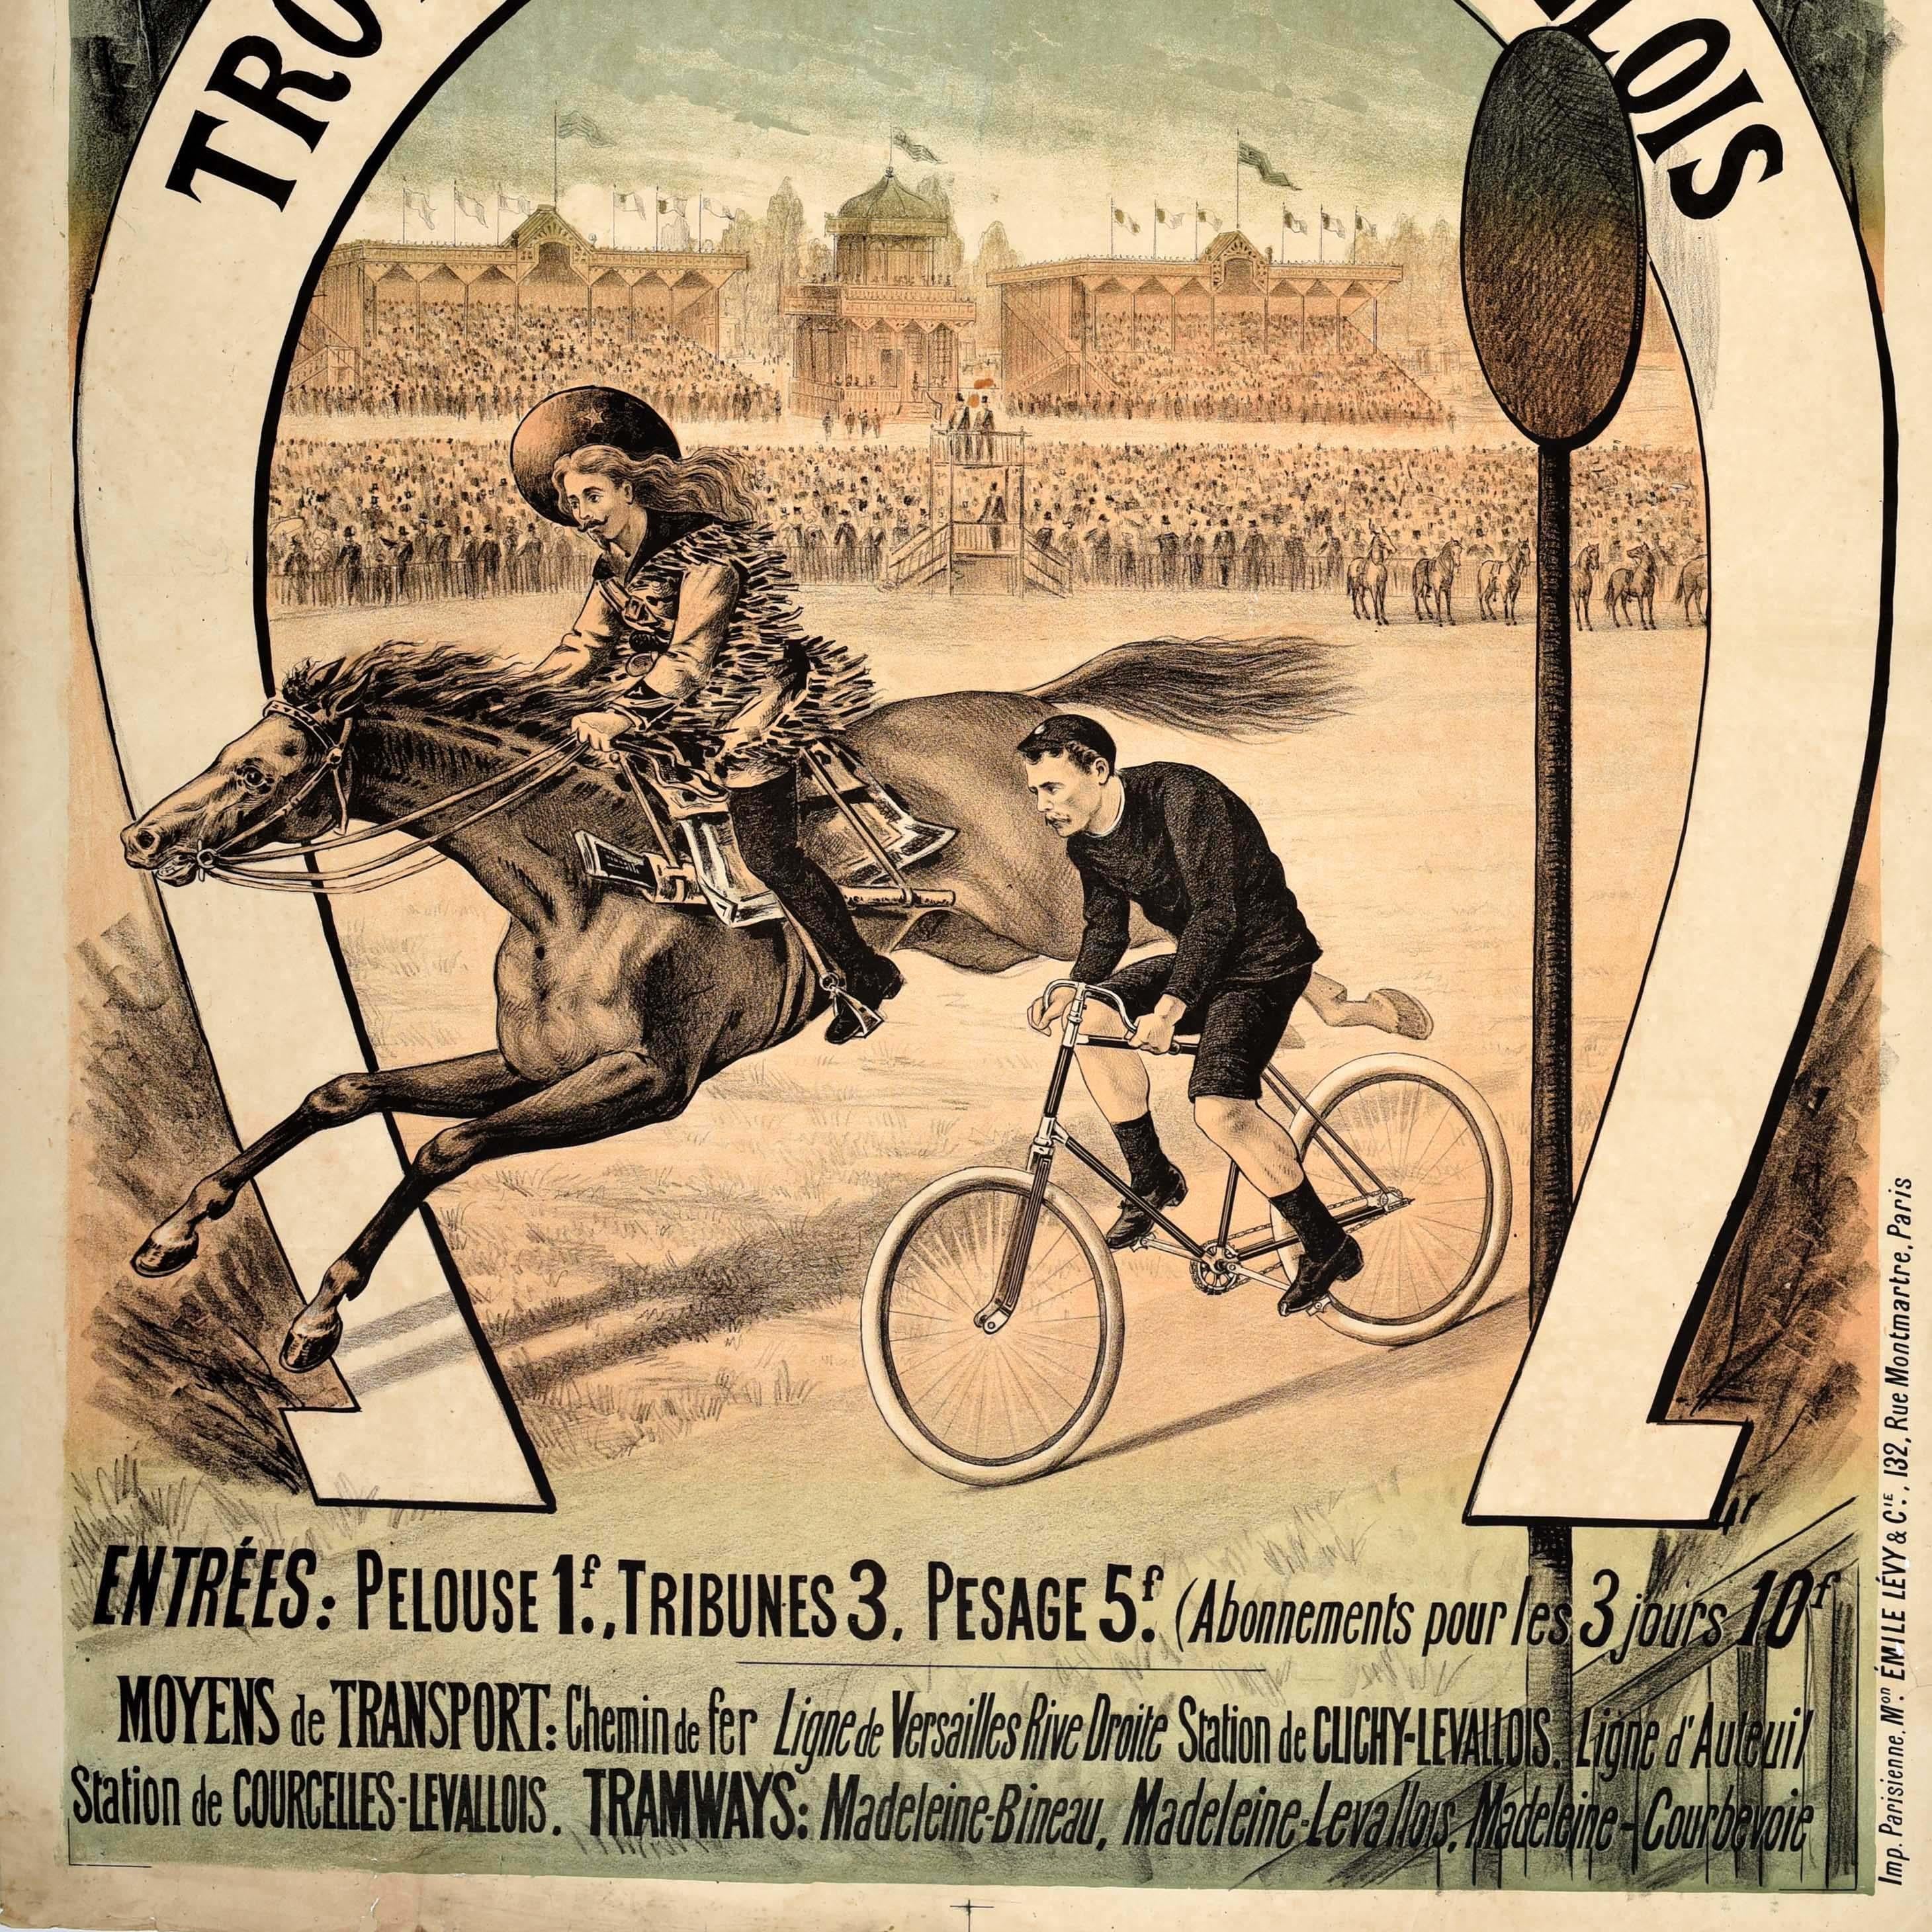 Original antique sport poster advertising the Trotting Club Levallois racing event between horse riders and cyclists featuring a great design depicting a man riding a bicycle at speed next to Buffalo Bill (William Frederick Cody; 1846-1917), the